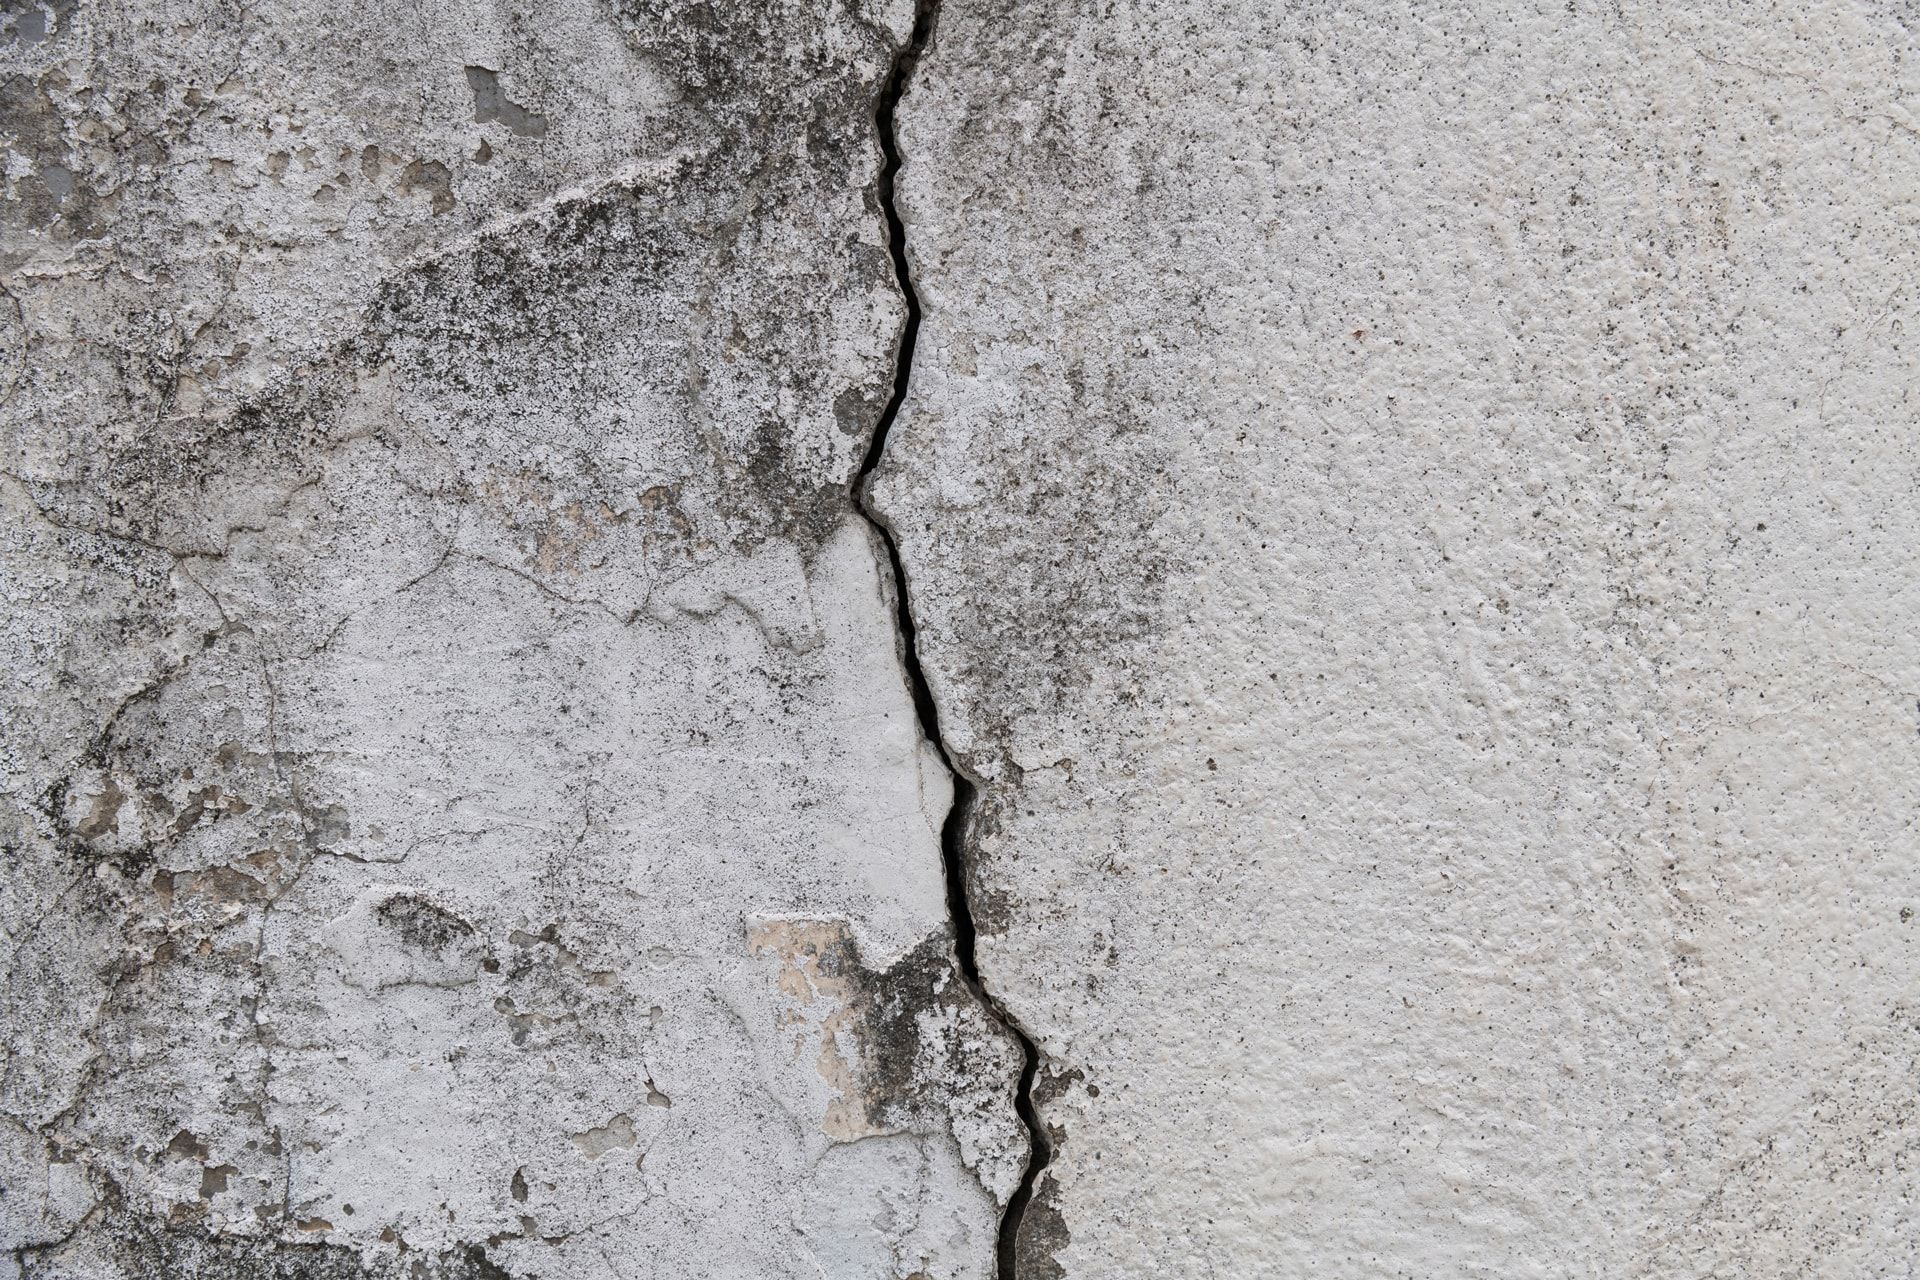 A crack in a foundation wall